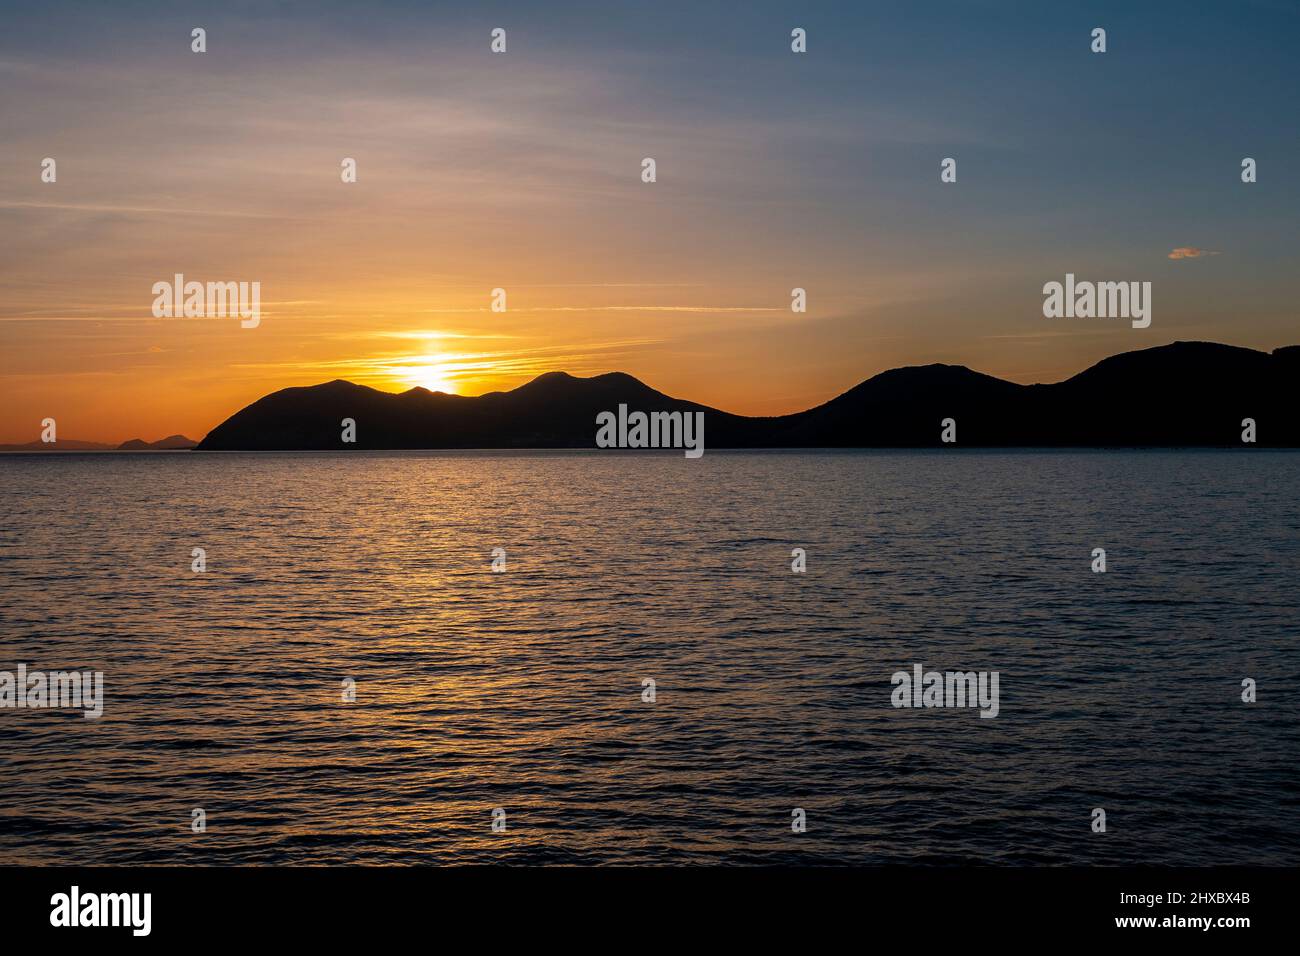 Silhouette of mountains at sunset viewed from Noja looking towards the Pico Del Monte Buciero in Santoña, Cantabria, Spain Stock Photo